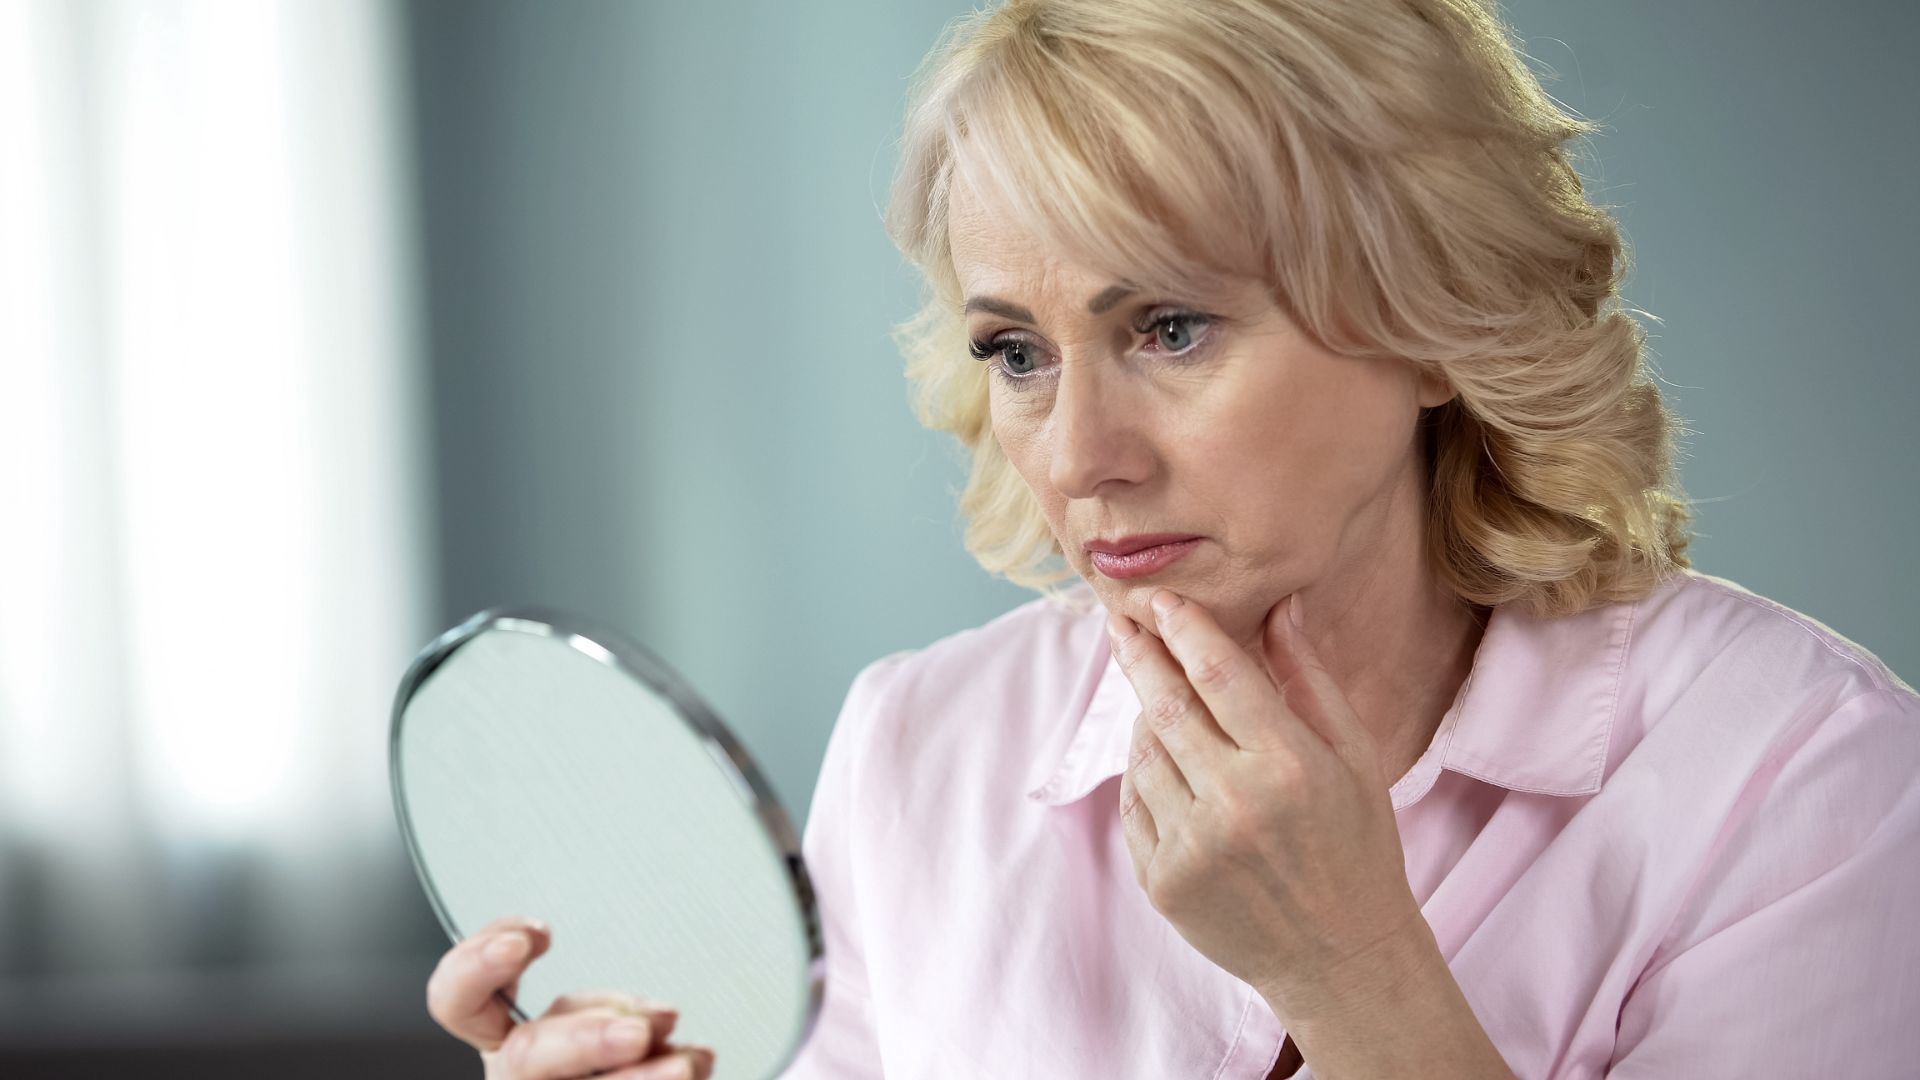 This photo depicts a senior woman looking at her skin in the mirror.